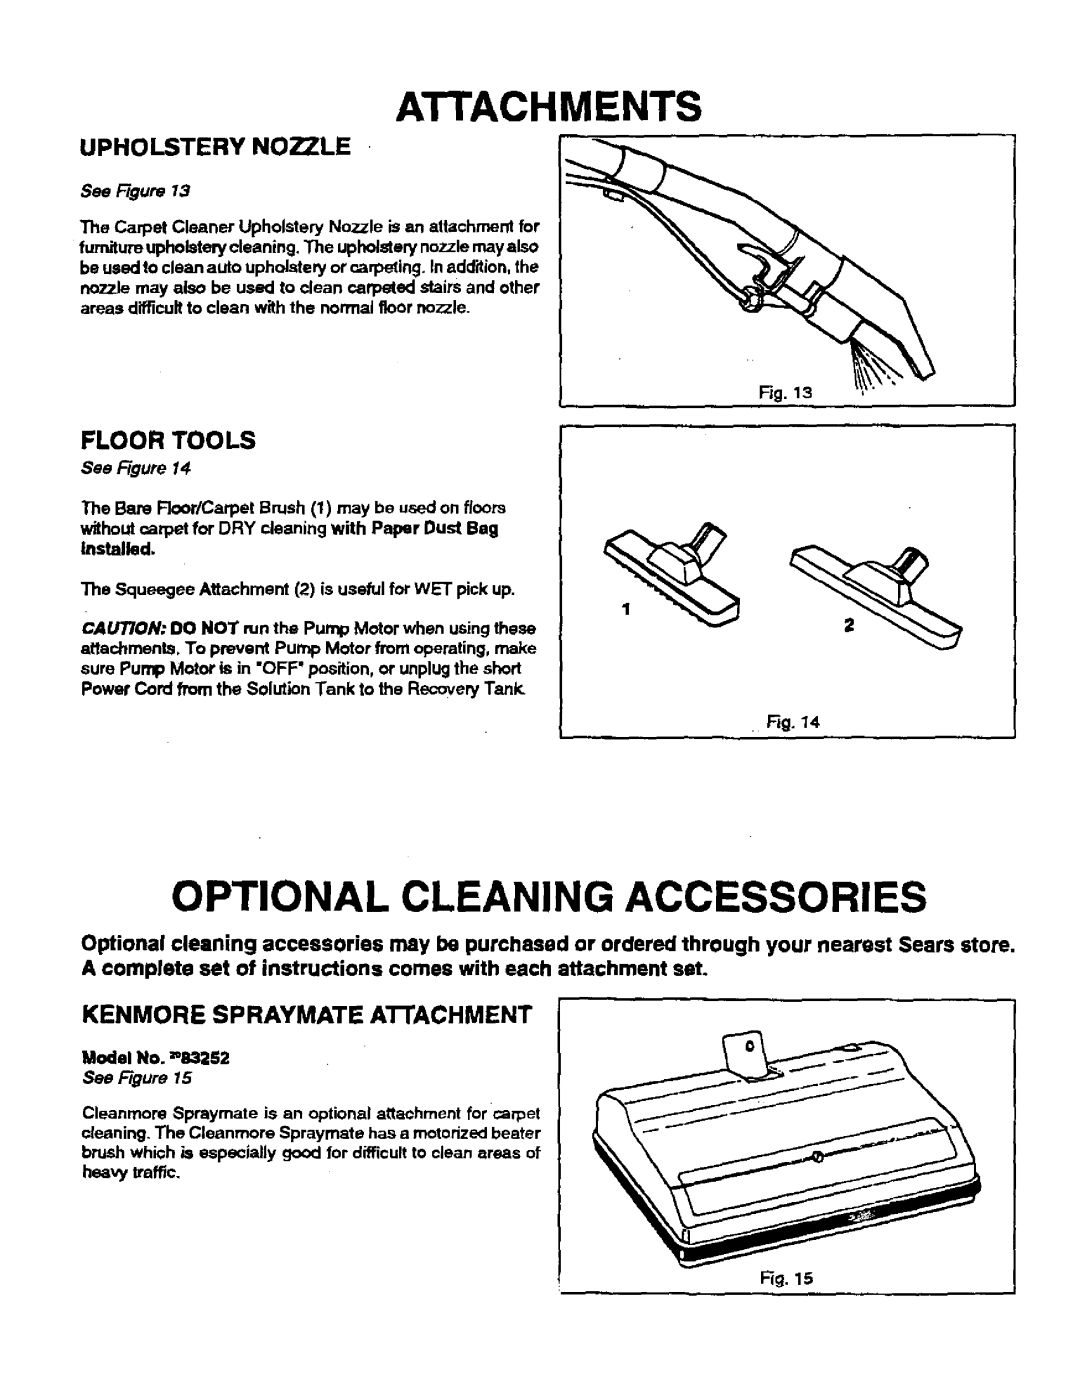 Sears 175.867029 Optional Cleaning Accessories, Attachments, Floor Tools, Upholstery Nozzle, KENMORE SPRAYMATE AI-rACHMENT 